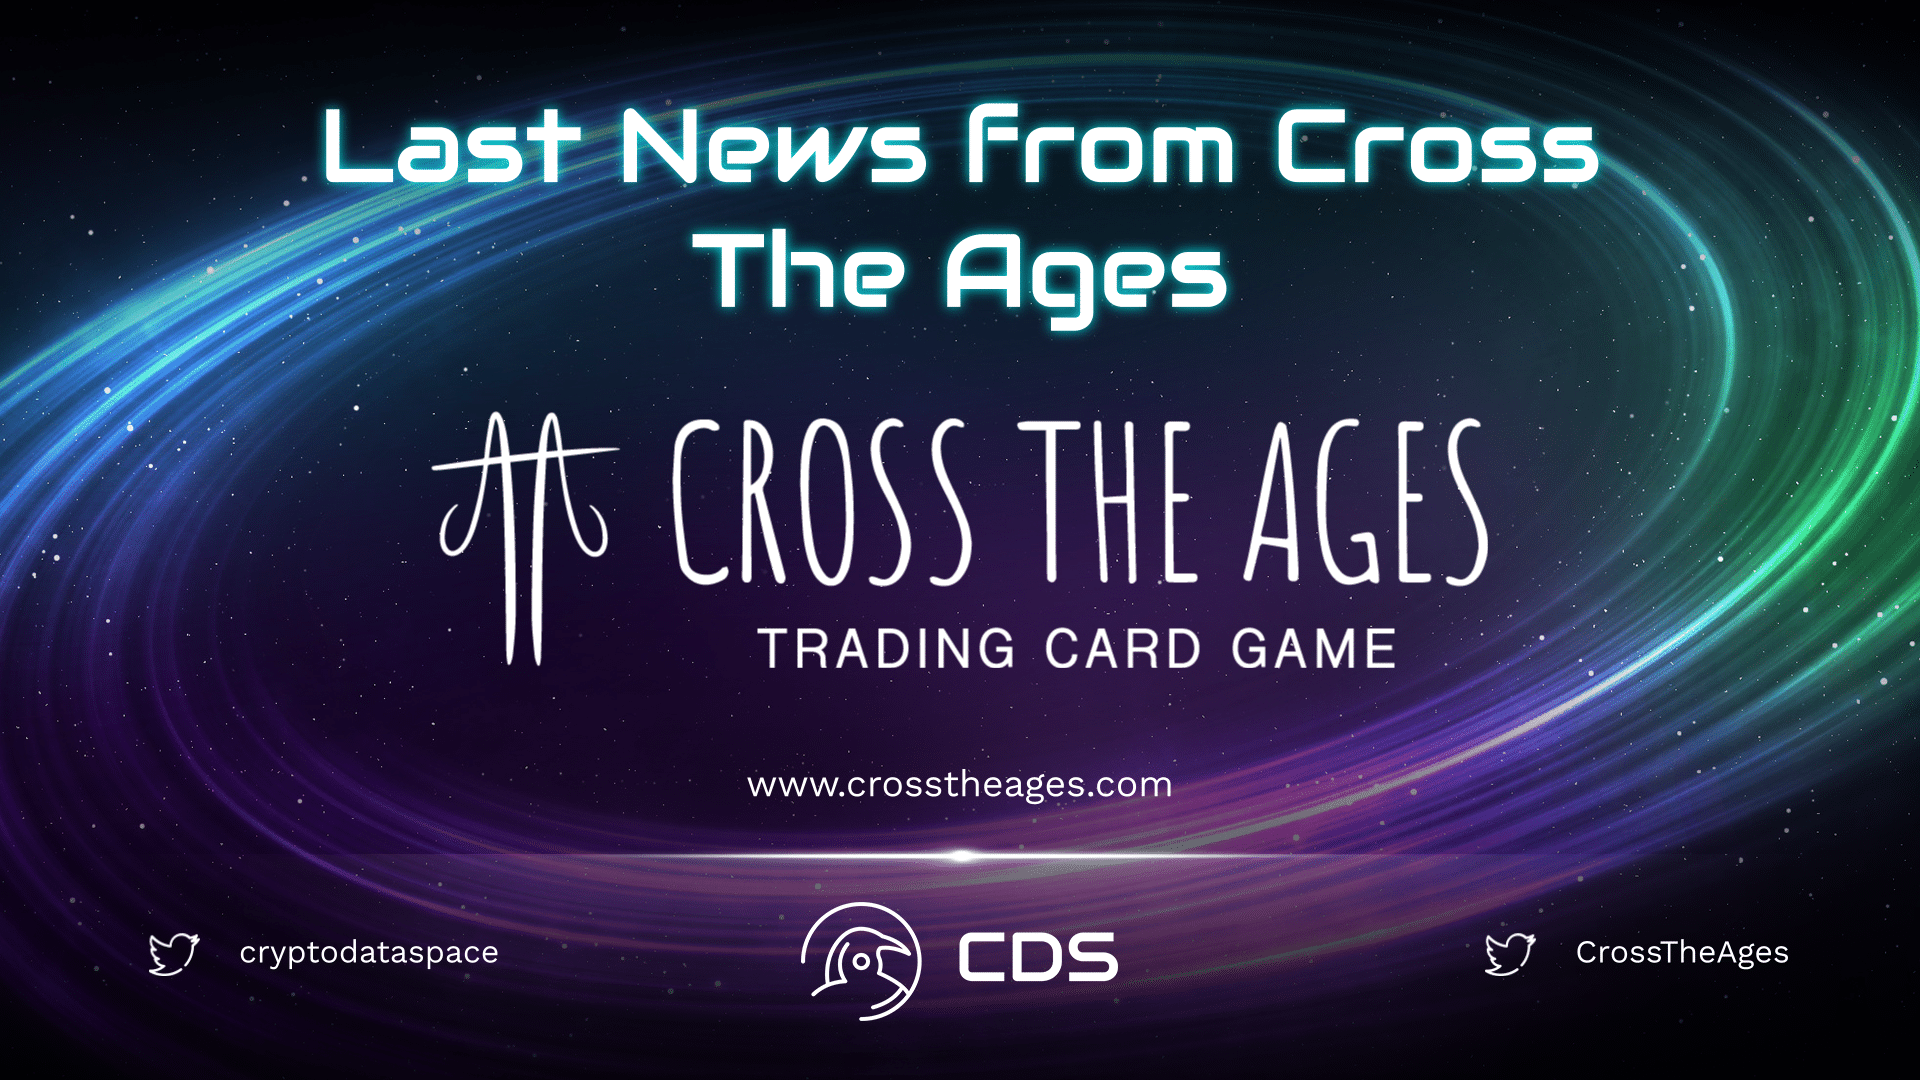 Last News from Cross the Ages